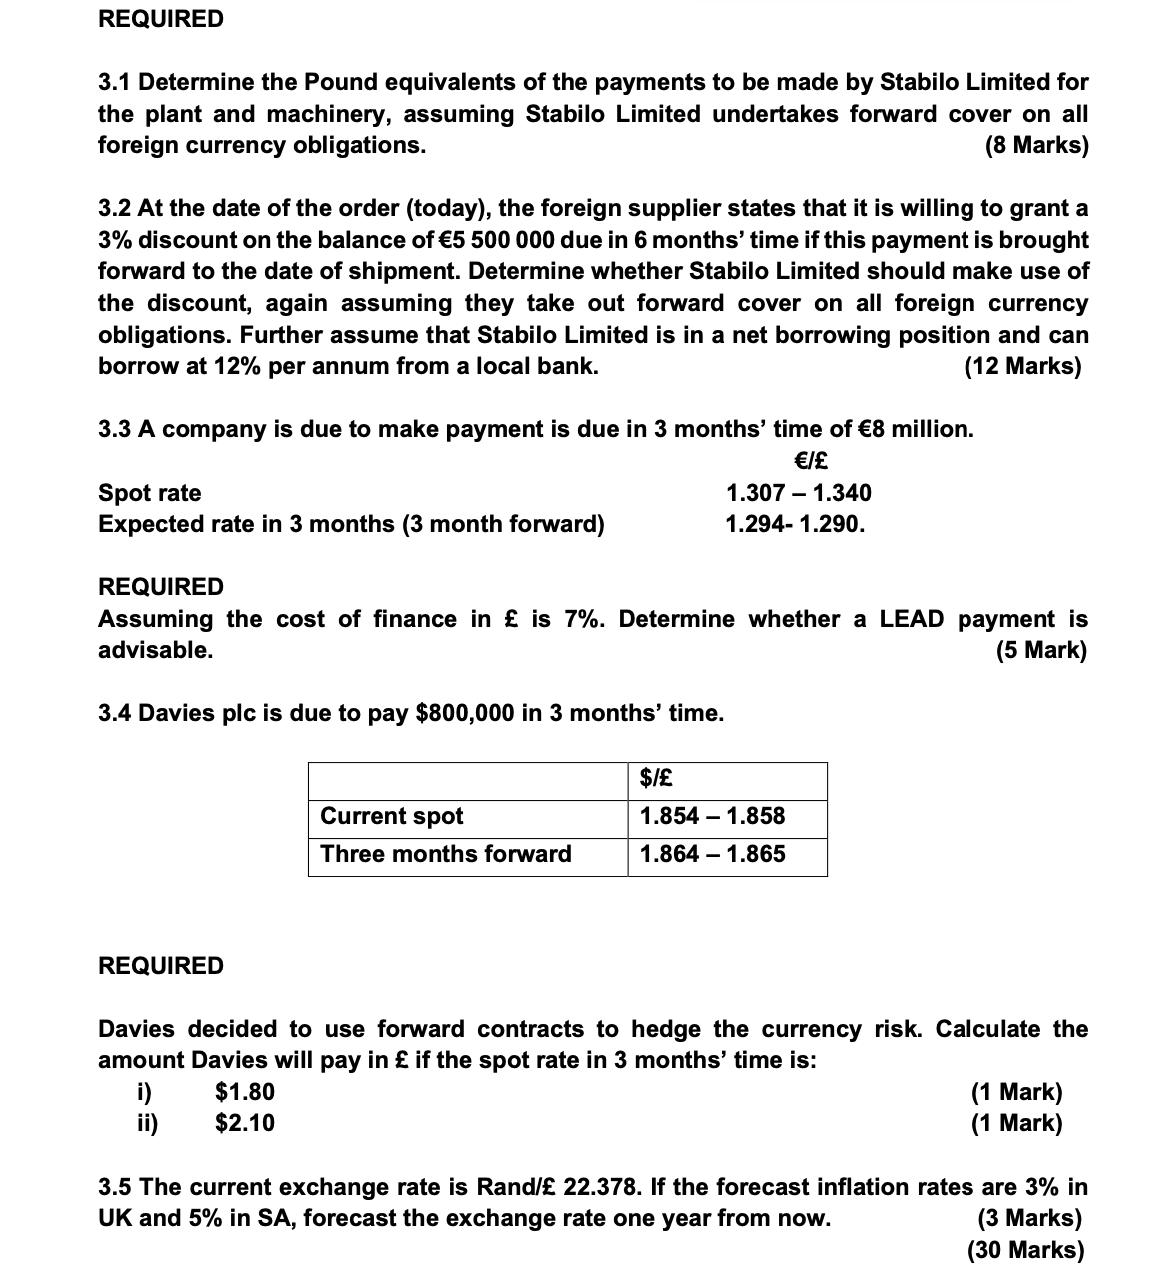 REQUIRED 3.1 Determine the Pound equivalents of the payments to be made by Stabilo Limited for the plant and